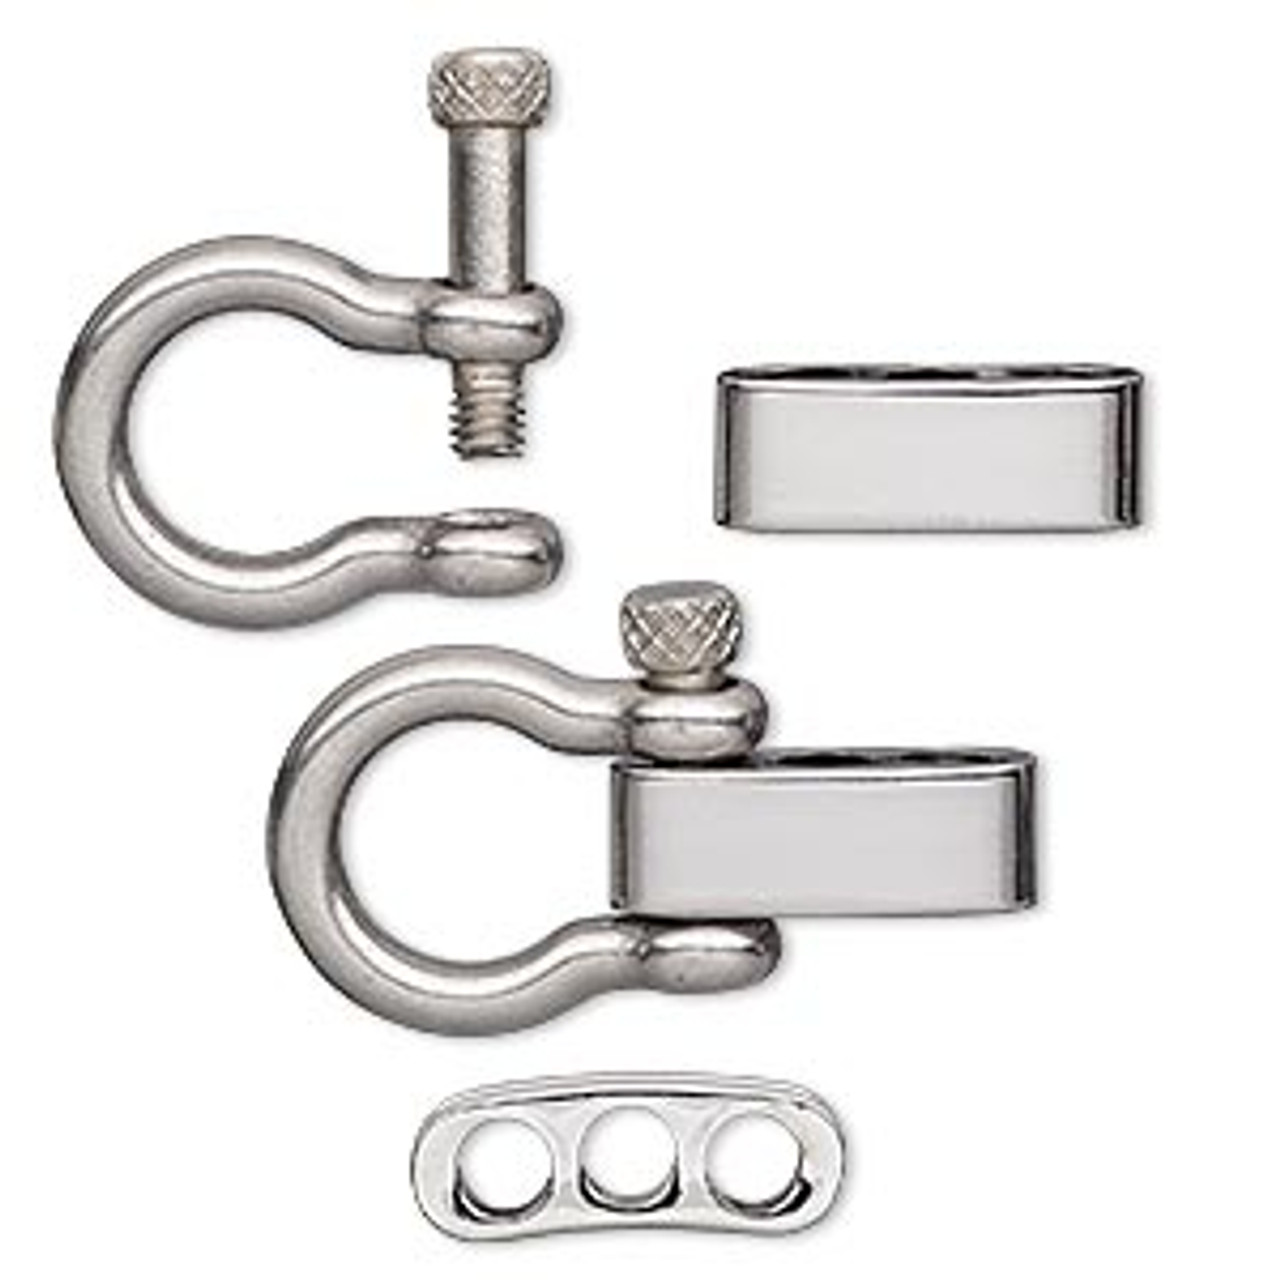 5 x Silver Screw Pin Bow Anchor Shackle European Style M6 304 Stainless Steel